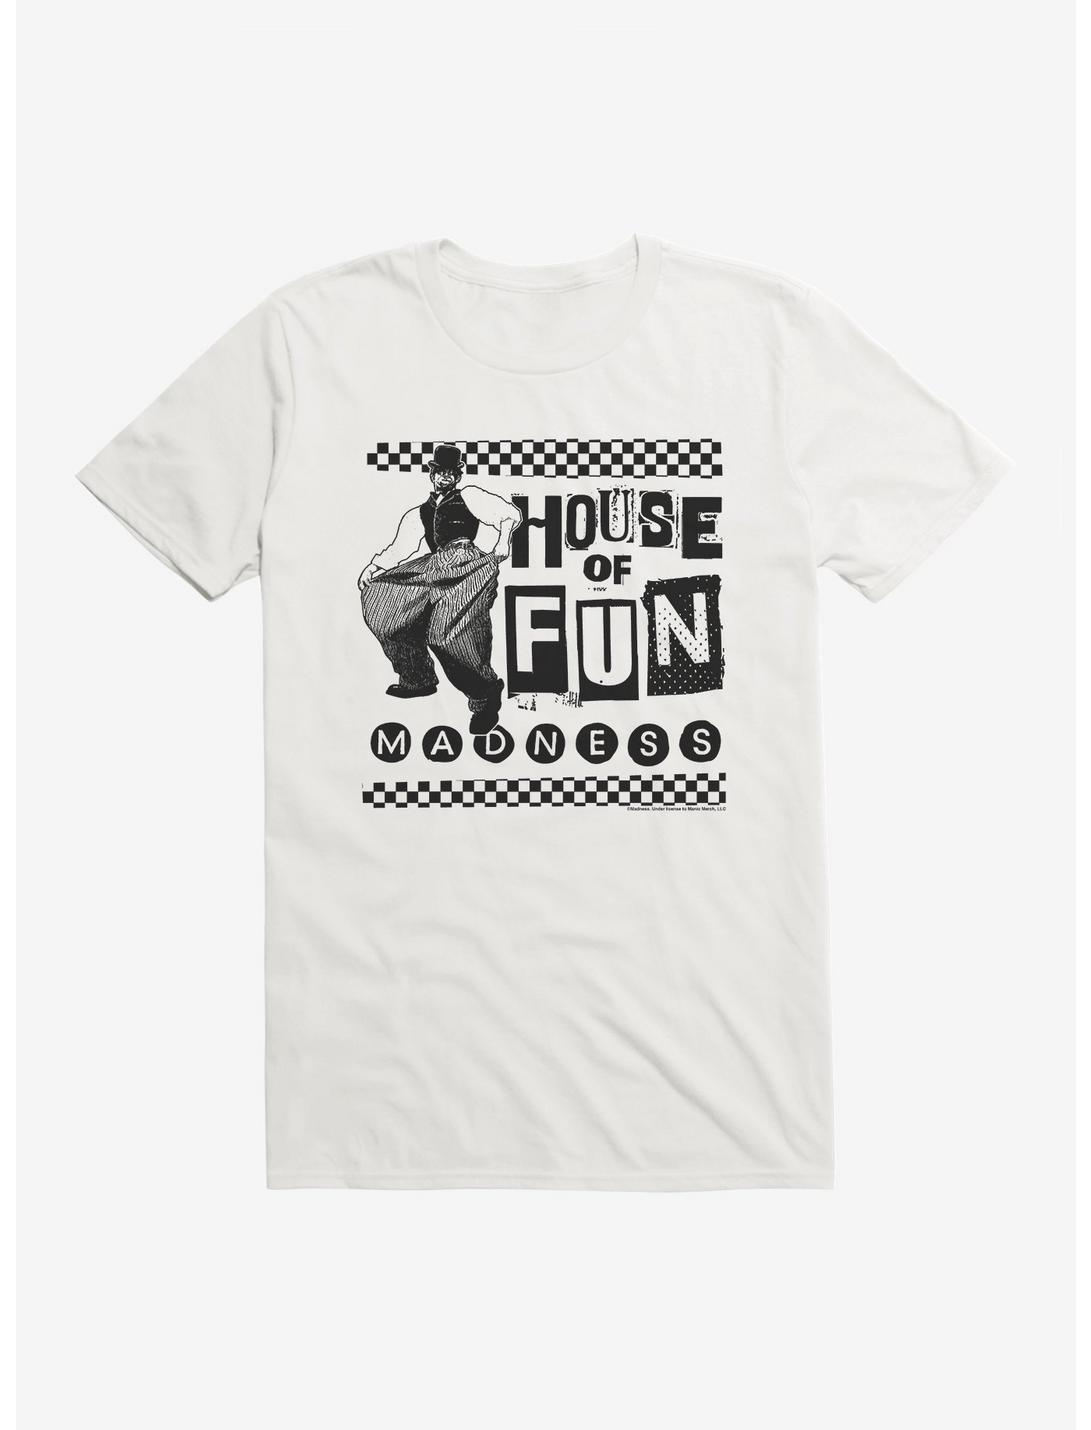 Madness House Of Fun T-Shirt, WHITE, hi-res